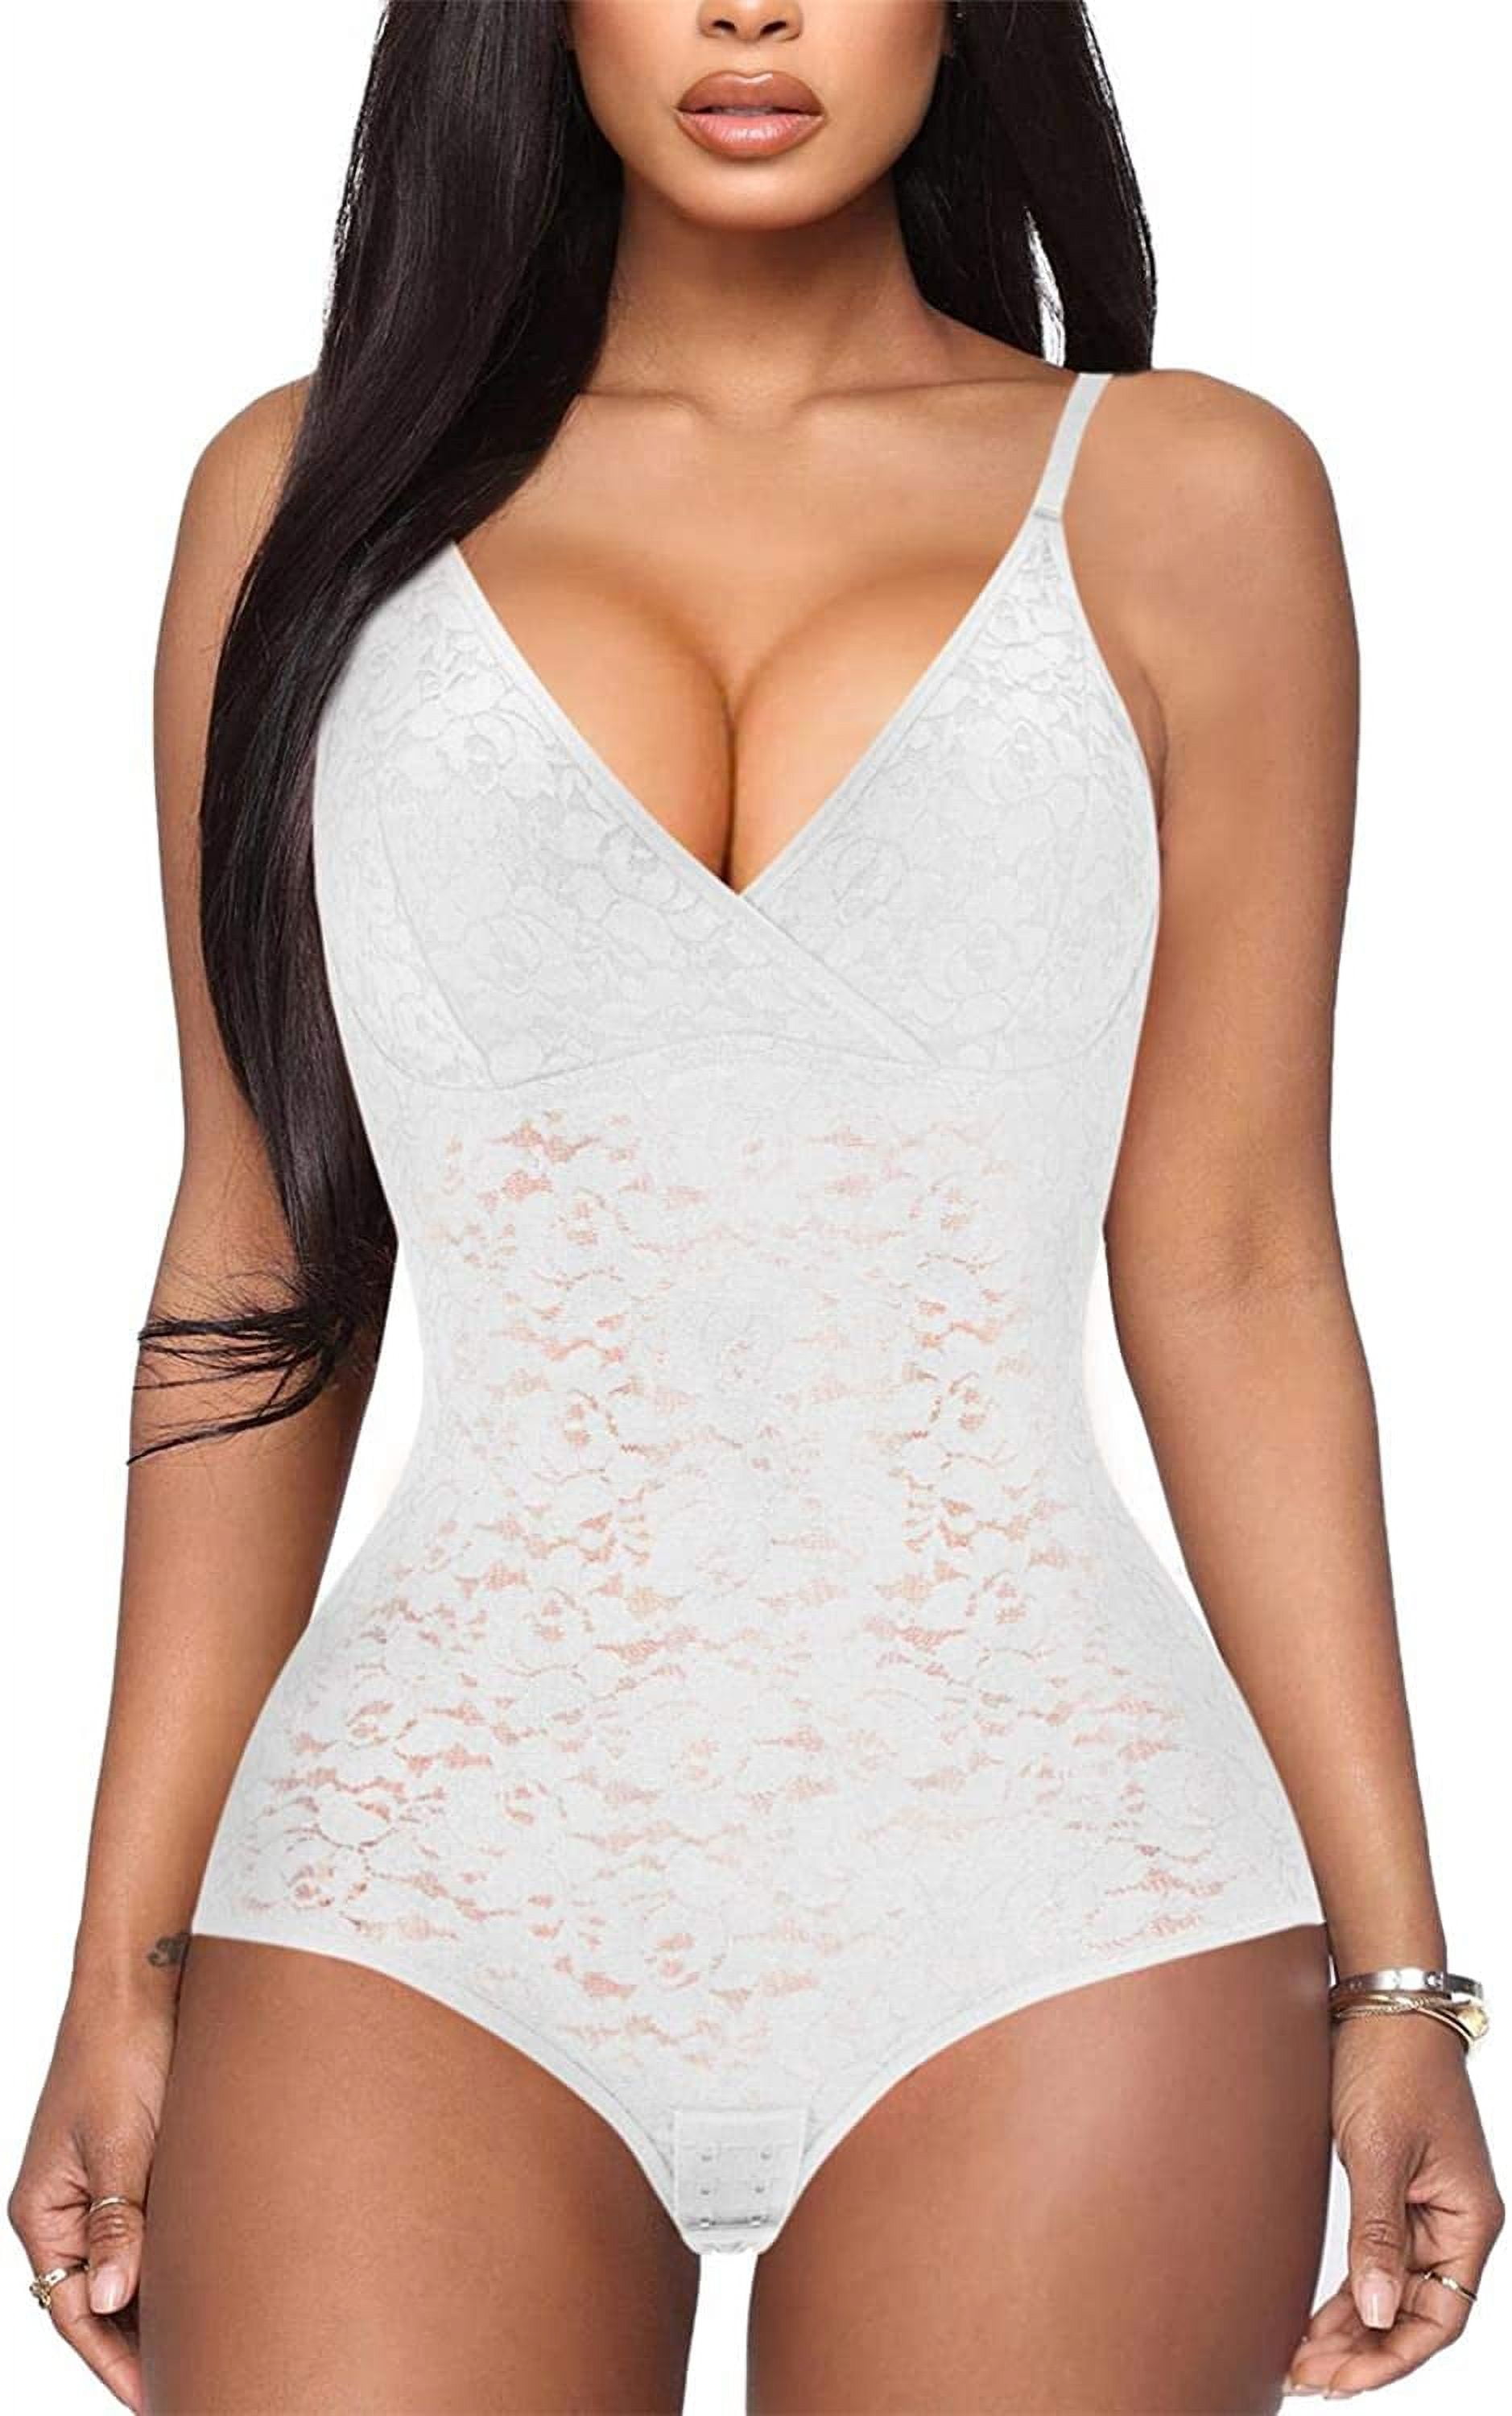 Gotoly Shapewear Tummy Control Bodysuit Cute Lace Cami V-Neck Tank Top  Waist Trainer Vest Smooth Body Shaper Slimming Corset(White Small) 